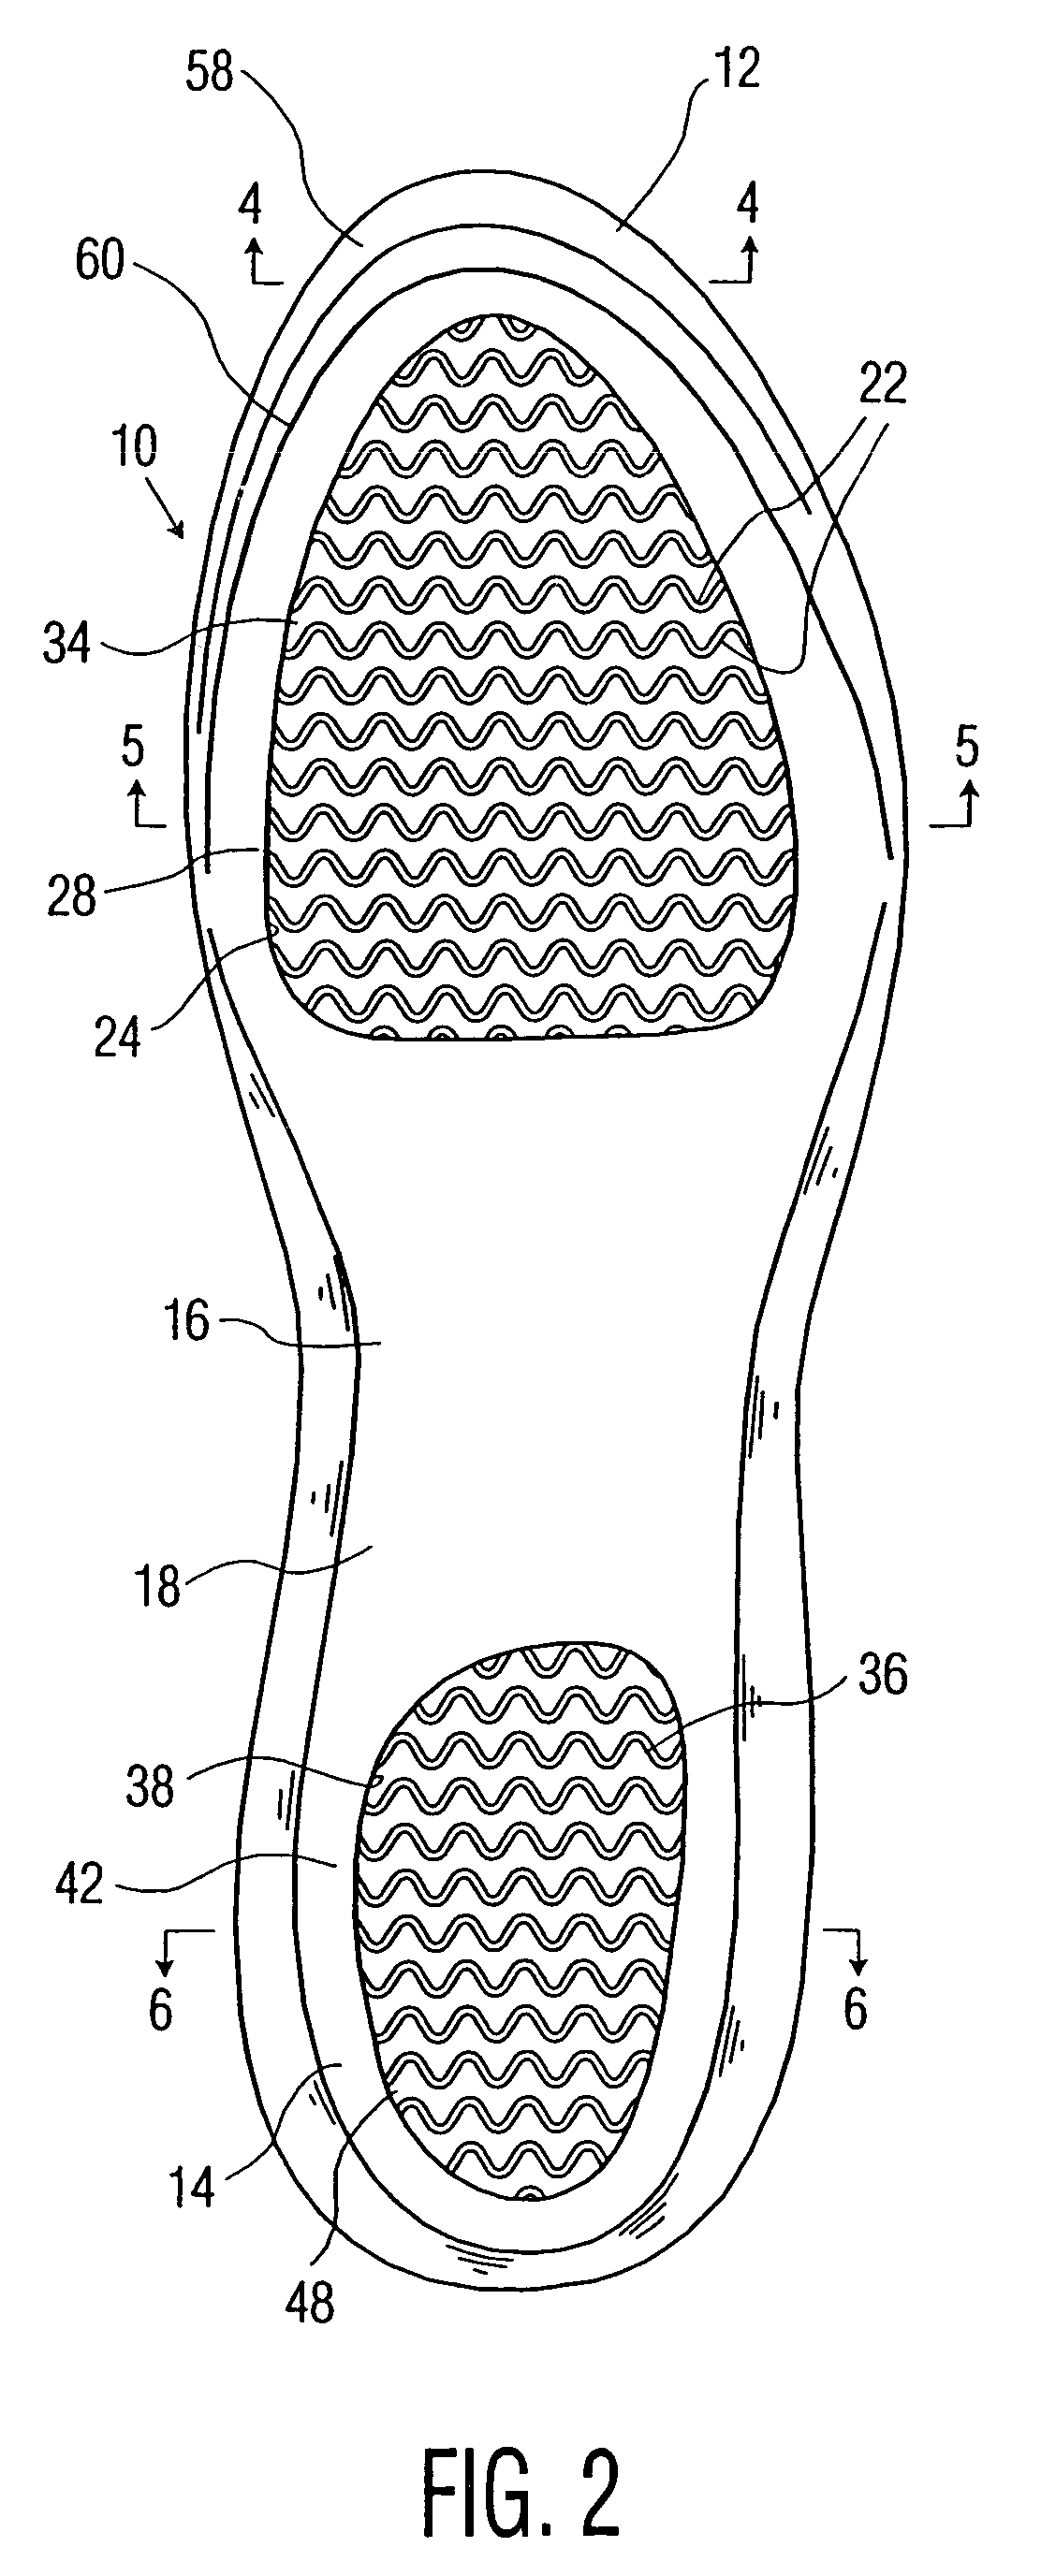 Gel insoles with lower heel and toe recesses having thin spring walls